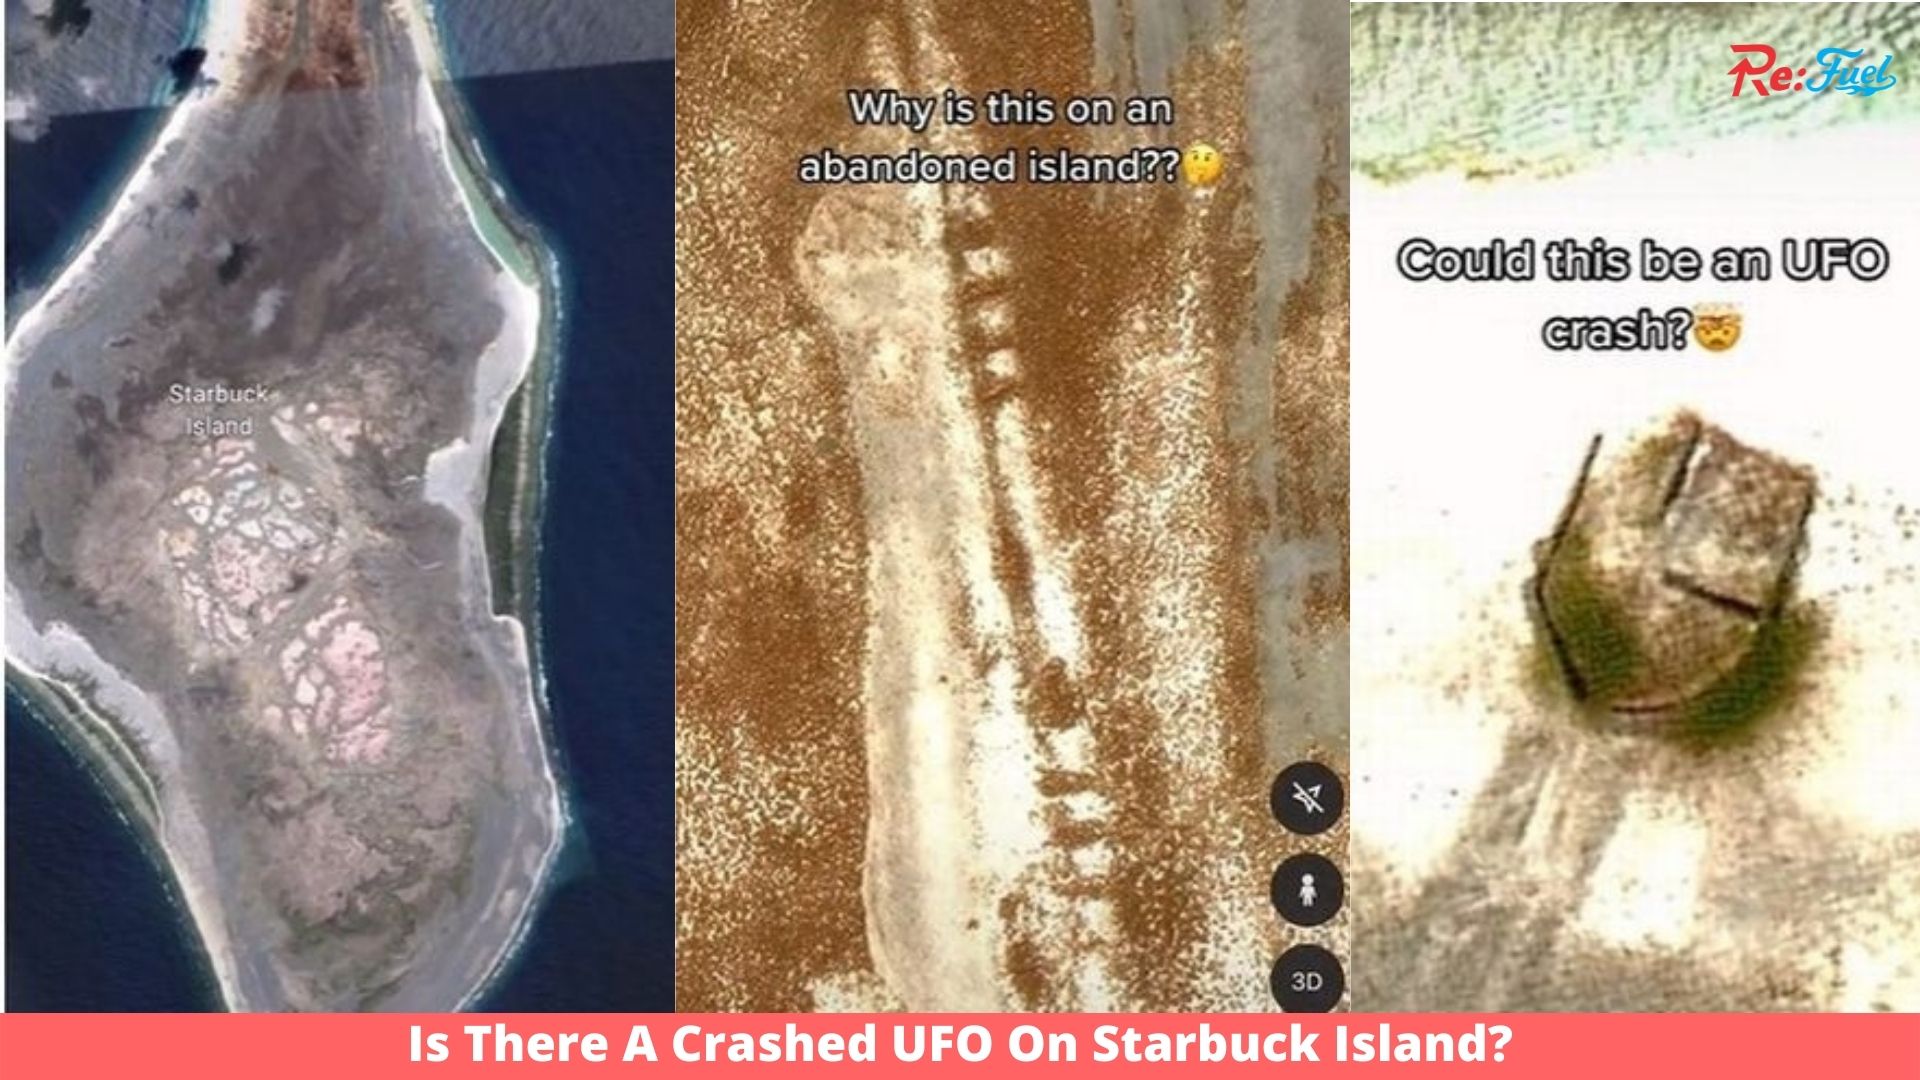 Is There A Crashed UFO On Starbuck Island?